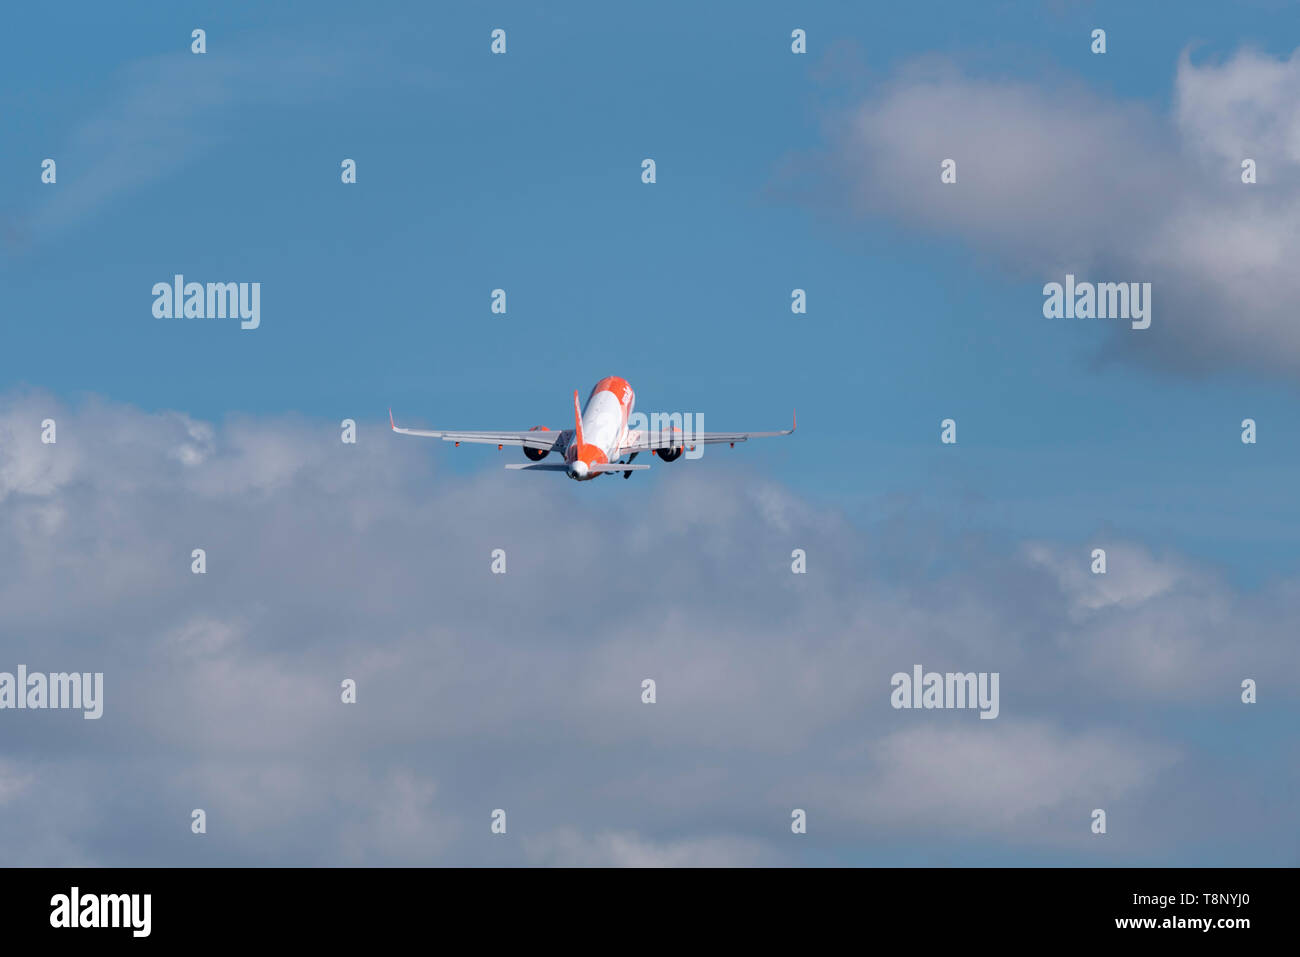 easyJet Airbus A321 jet airliner plane G-UZHS climbing out after take off at London Southend Airport Essex, UK. Budget airline. Climb out. Flying away Stock Photo